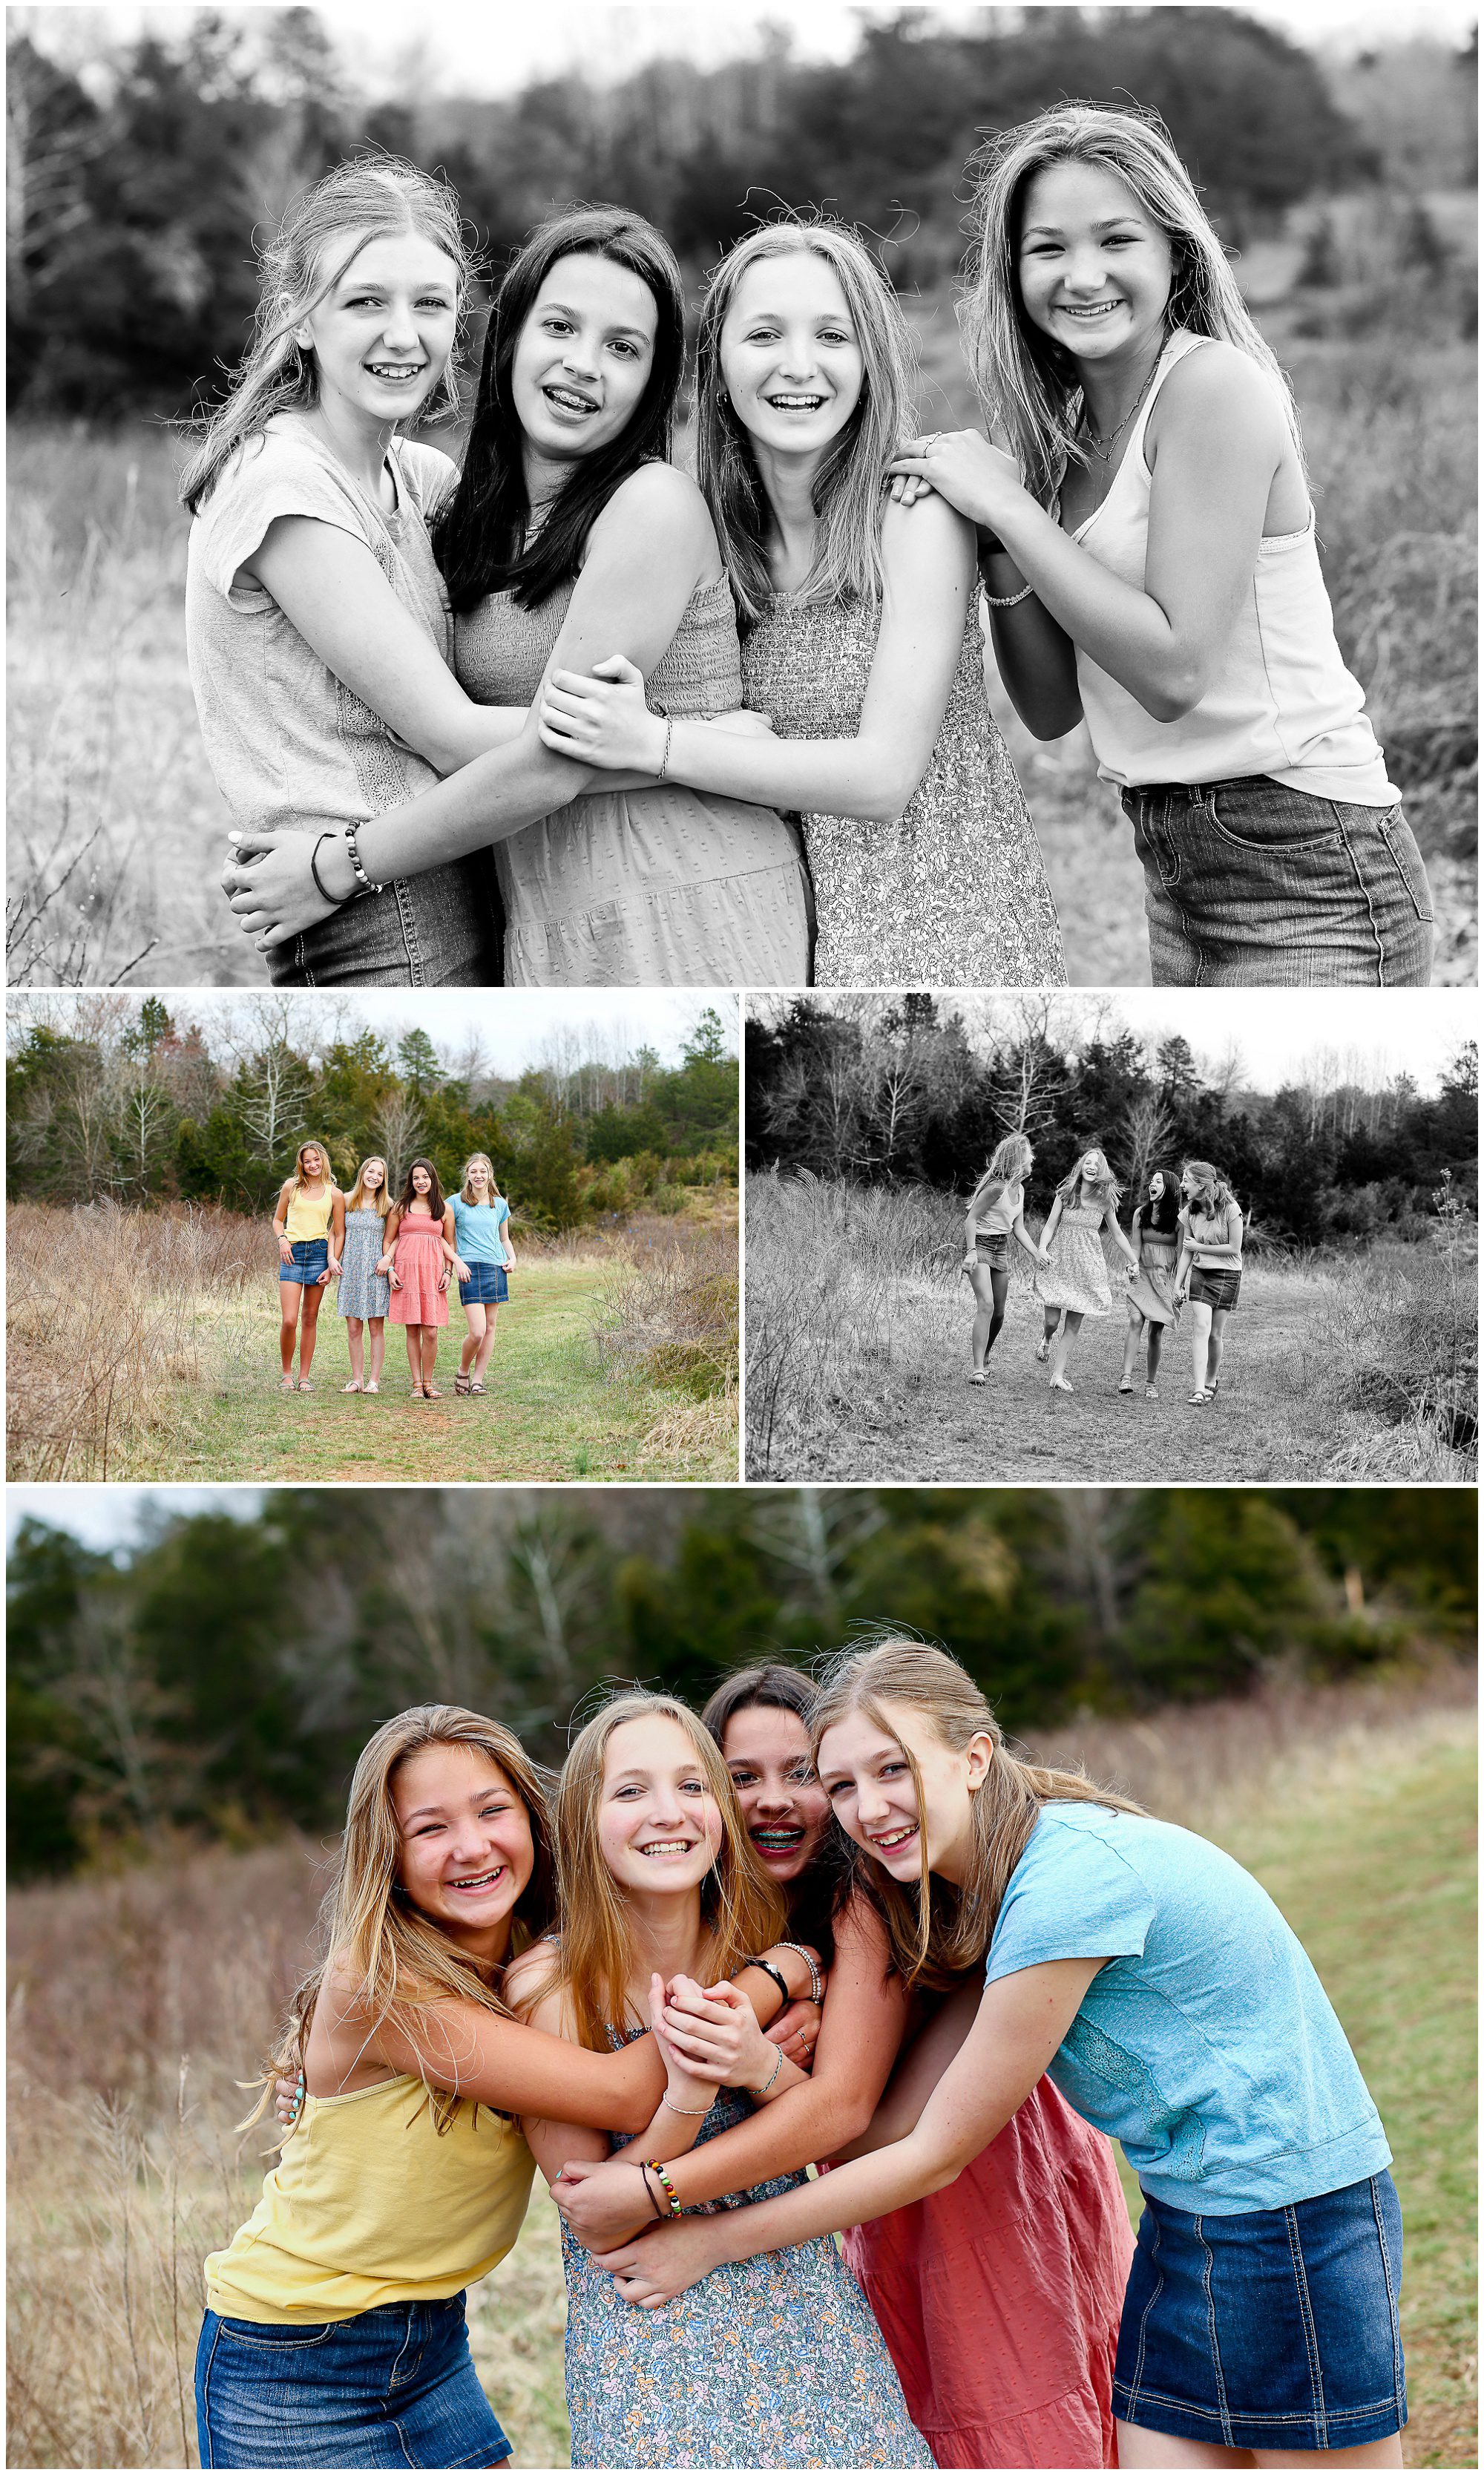 Friends Portraits for 13th Birthday in Fluvanna Teen Girls Friendship Lake Monticello Charlottesville Photoshoot Pictures Photographer